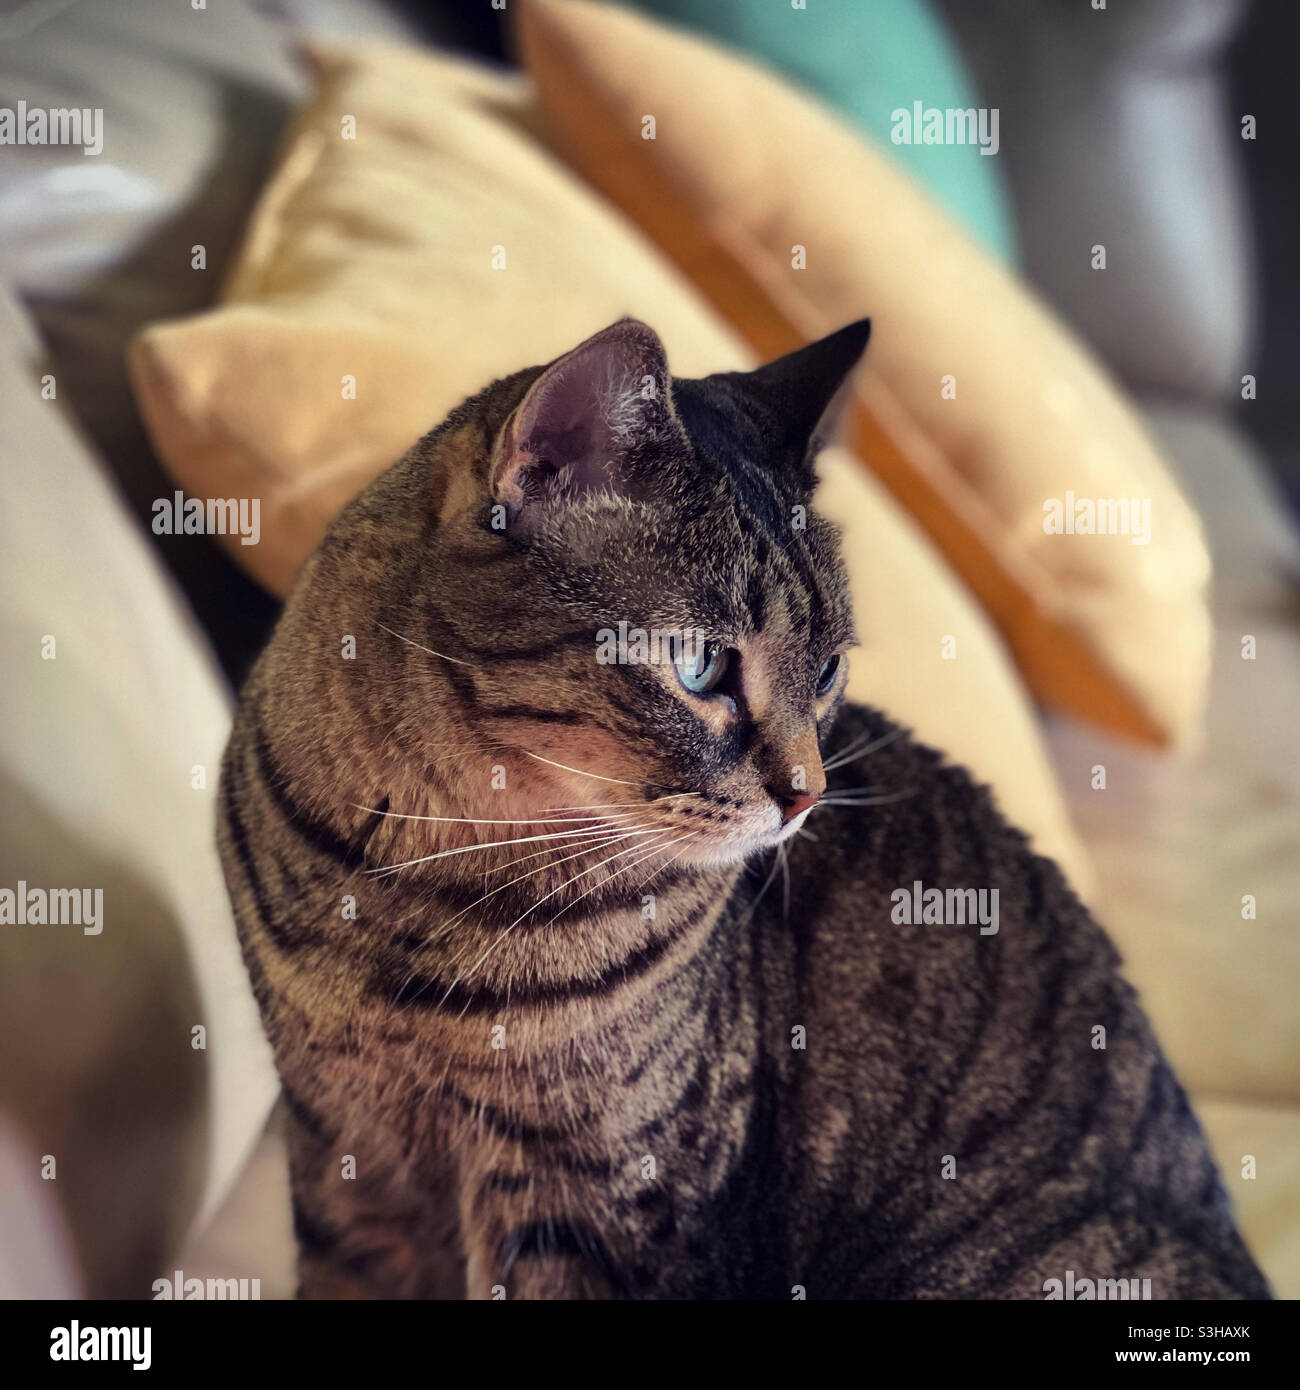 Tabby cat on couch Stock Photo